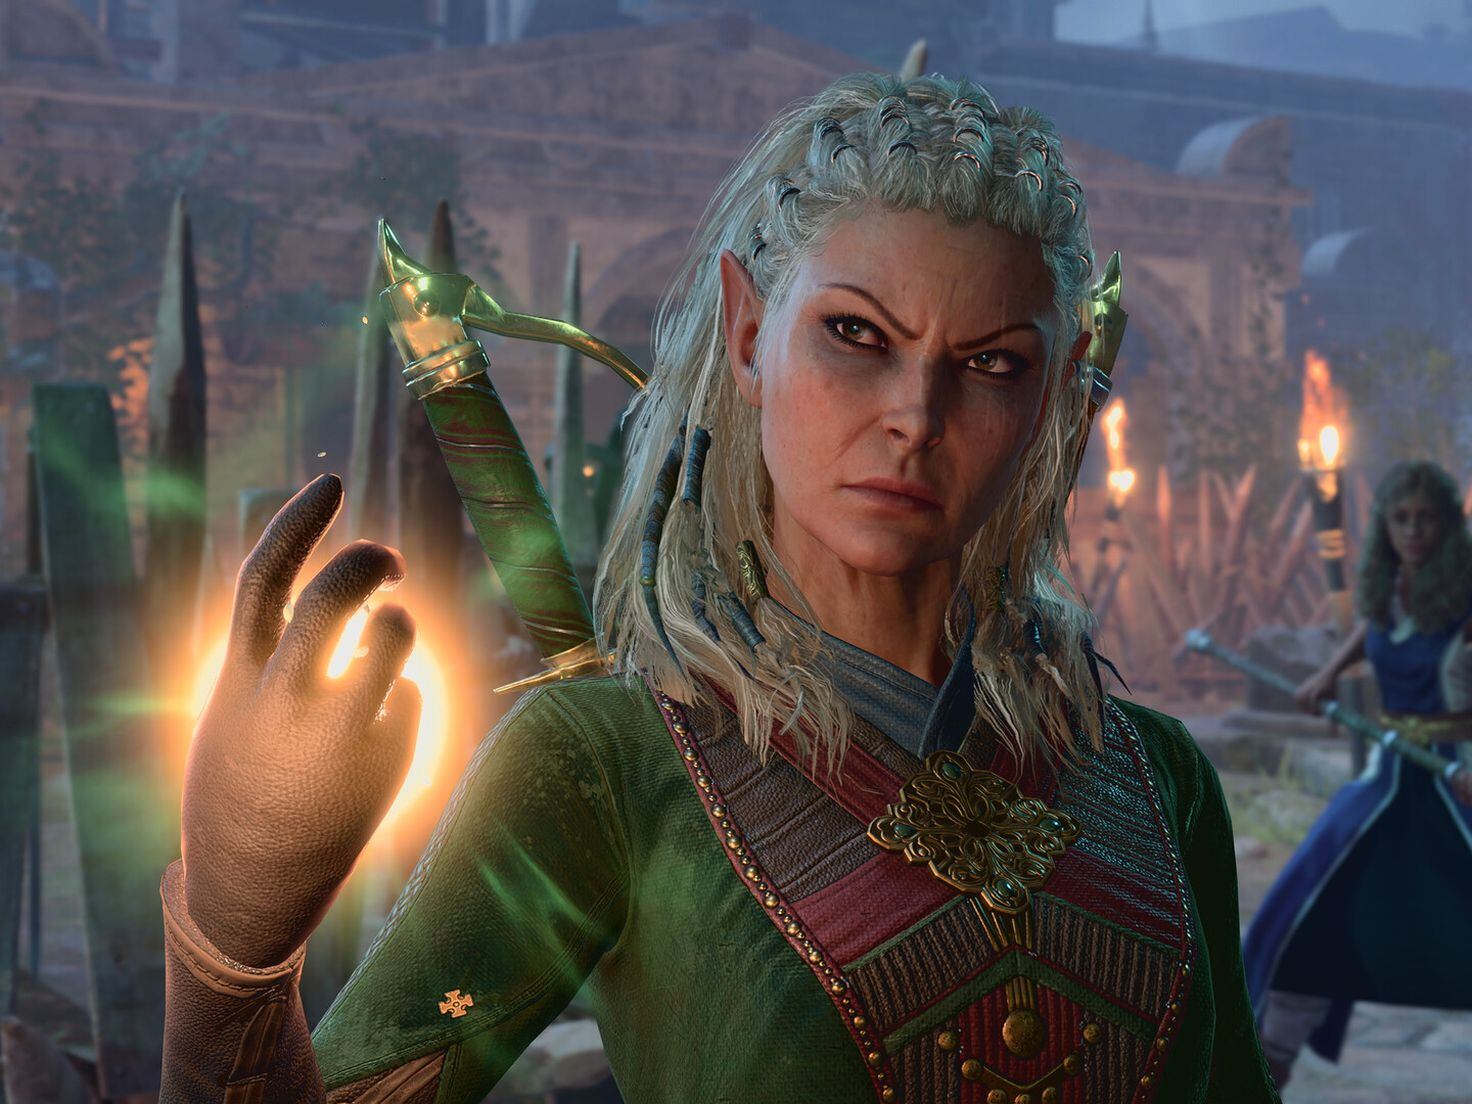 Play Six Hours Of Dragon Age: Inquisition For Free On PC - Game